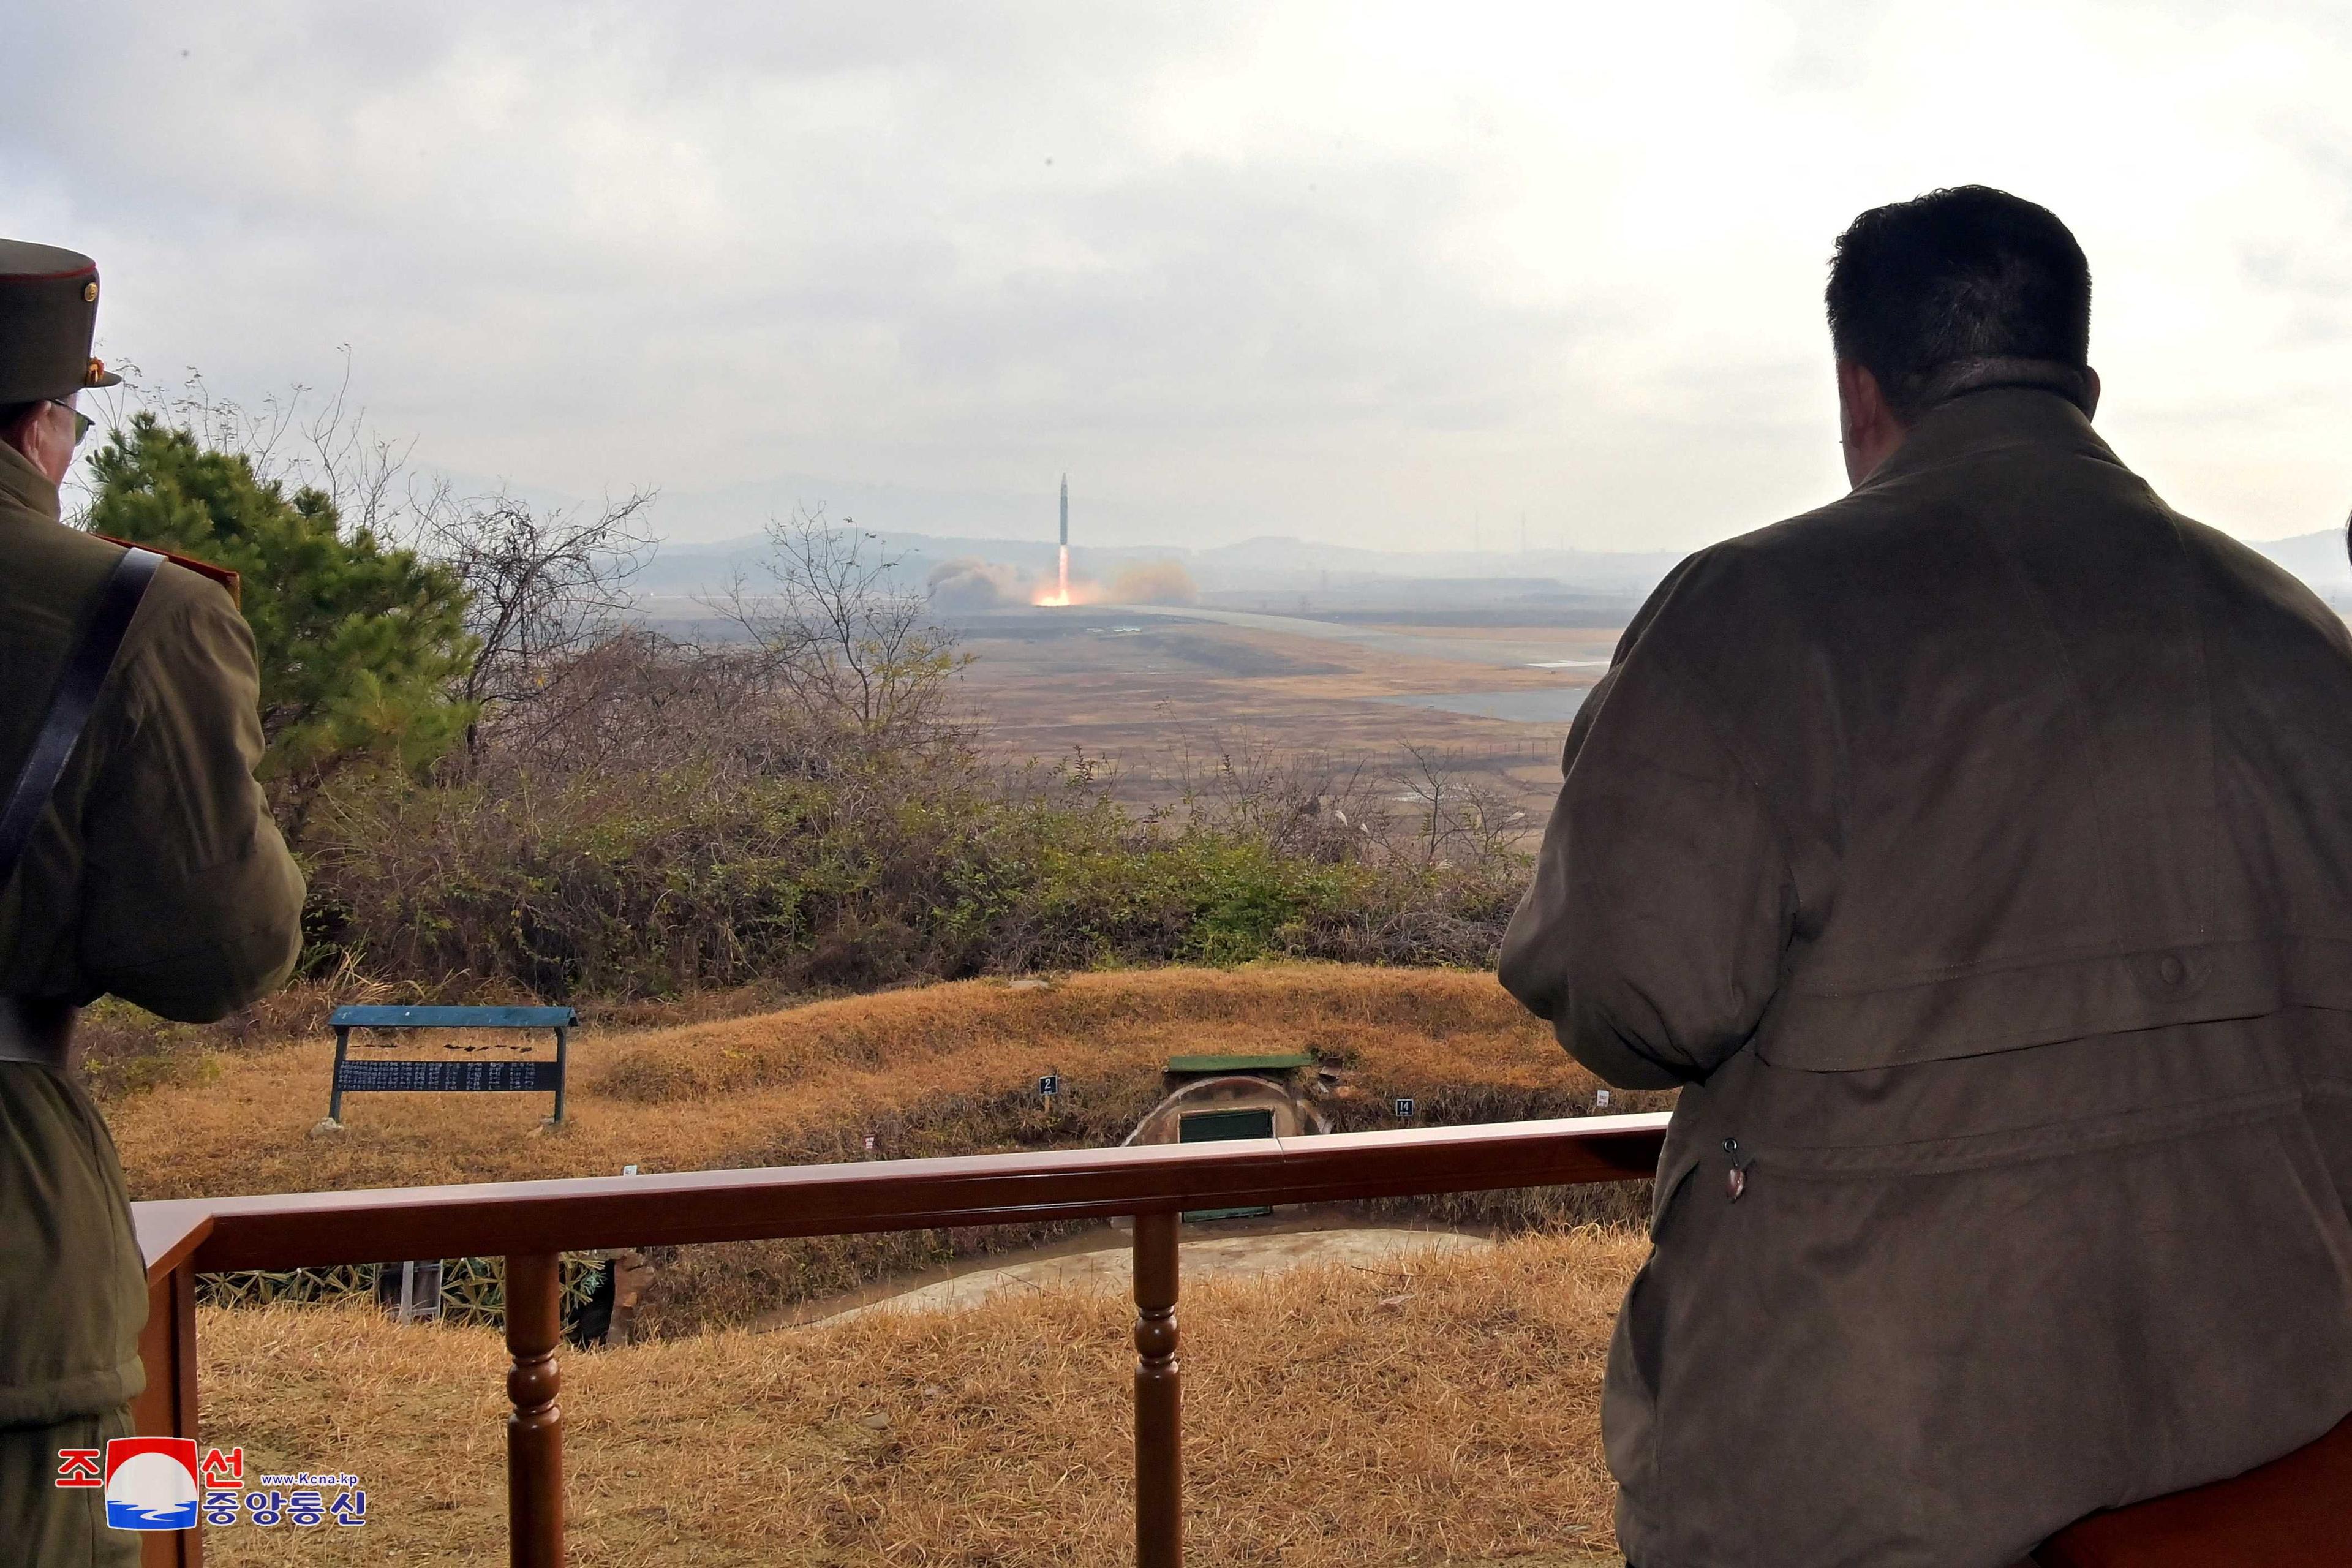 North Korean leader Kim Jong Un watches the launch of an intercontinental ballistic missile in this undated photo released on Nov 19, 2022. Photo: Reuters